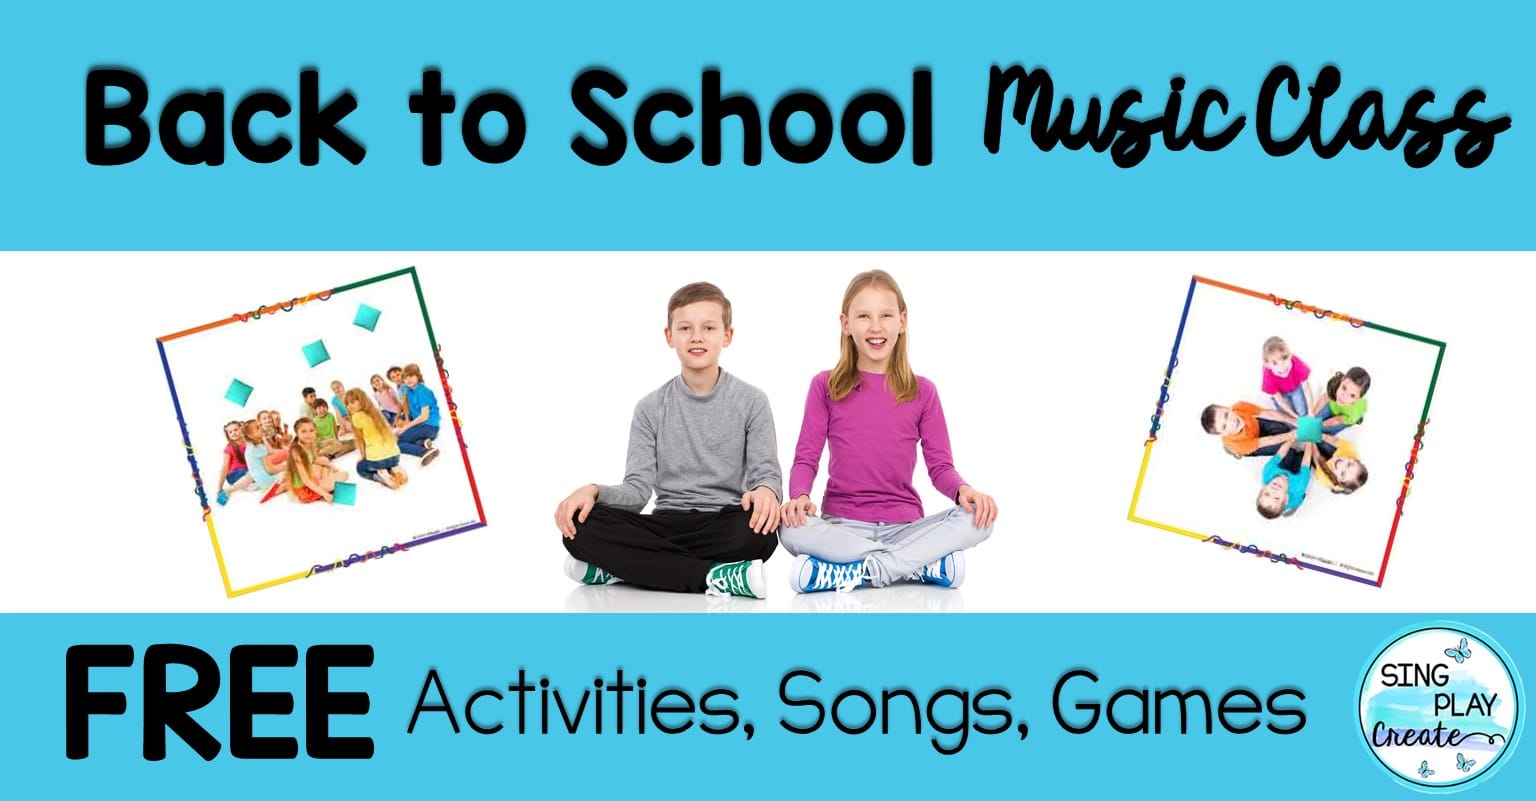 You are currently viewing Back to School Activities, Songs, Games and Chants